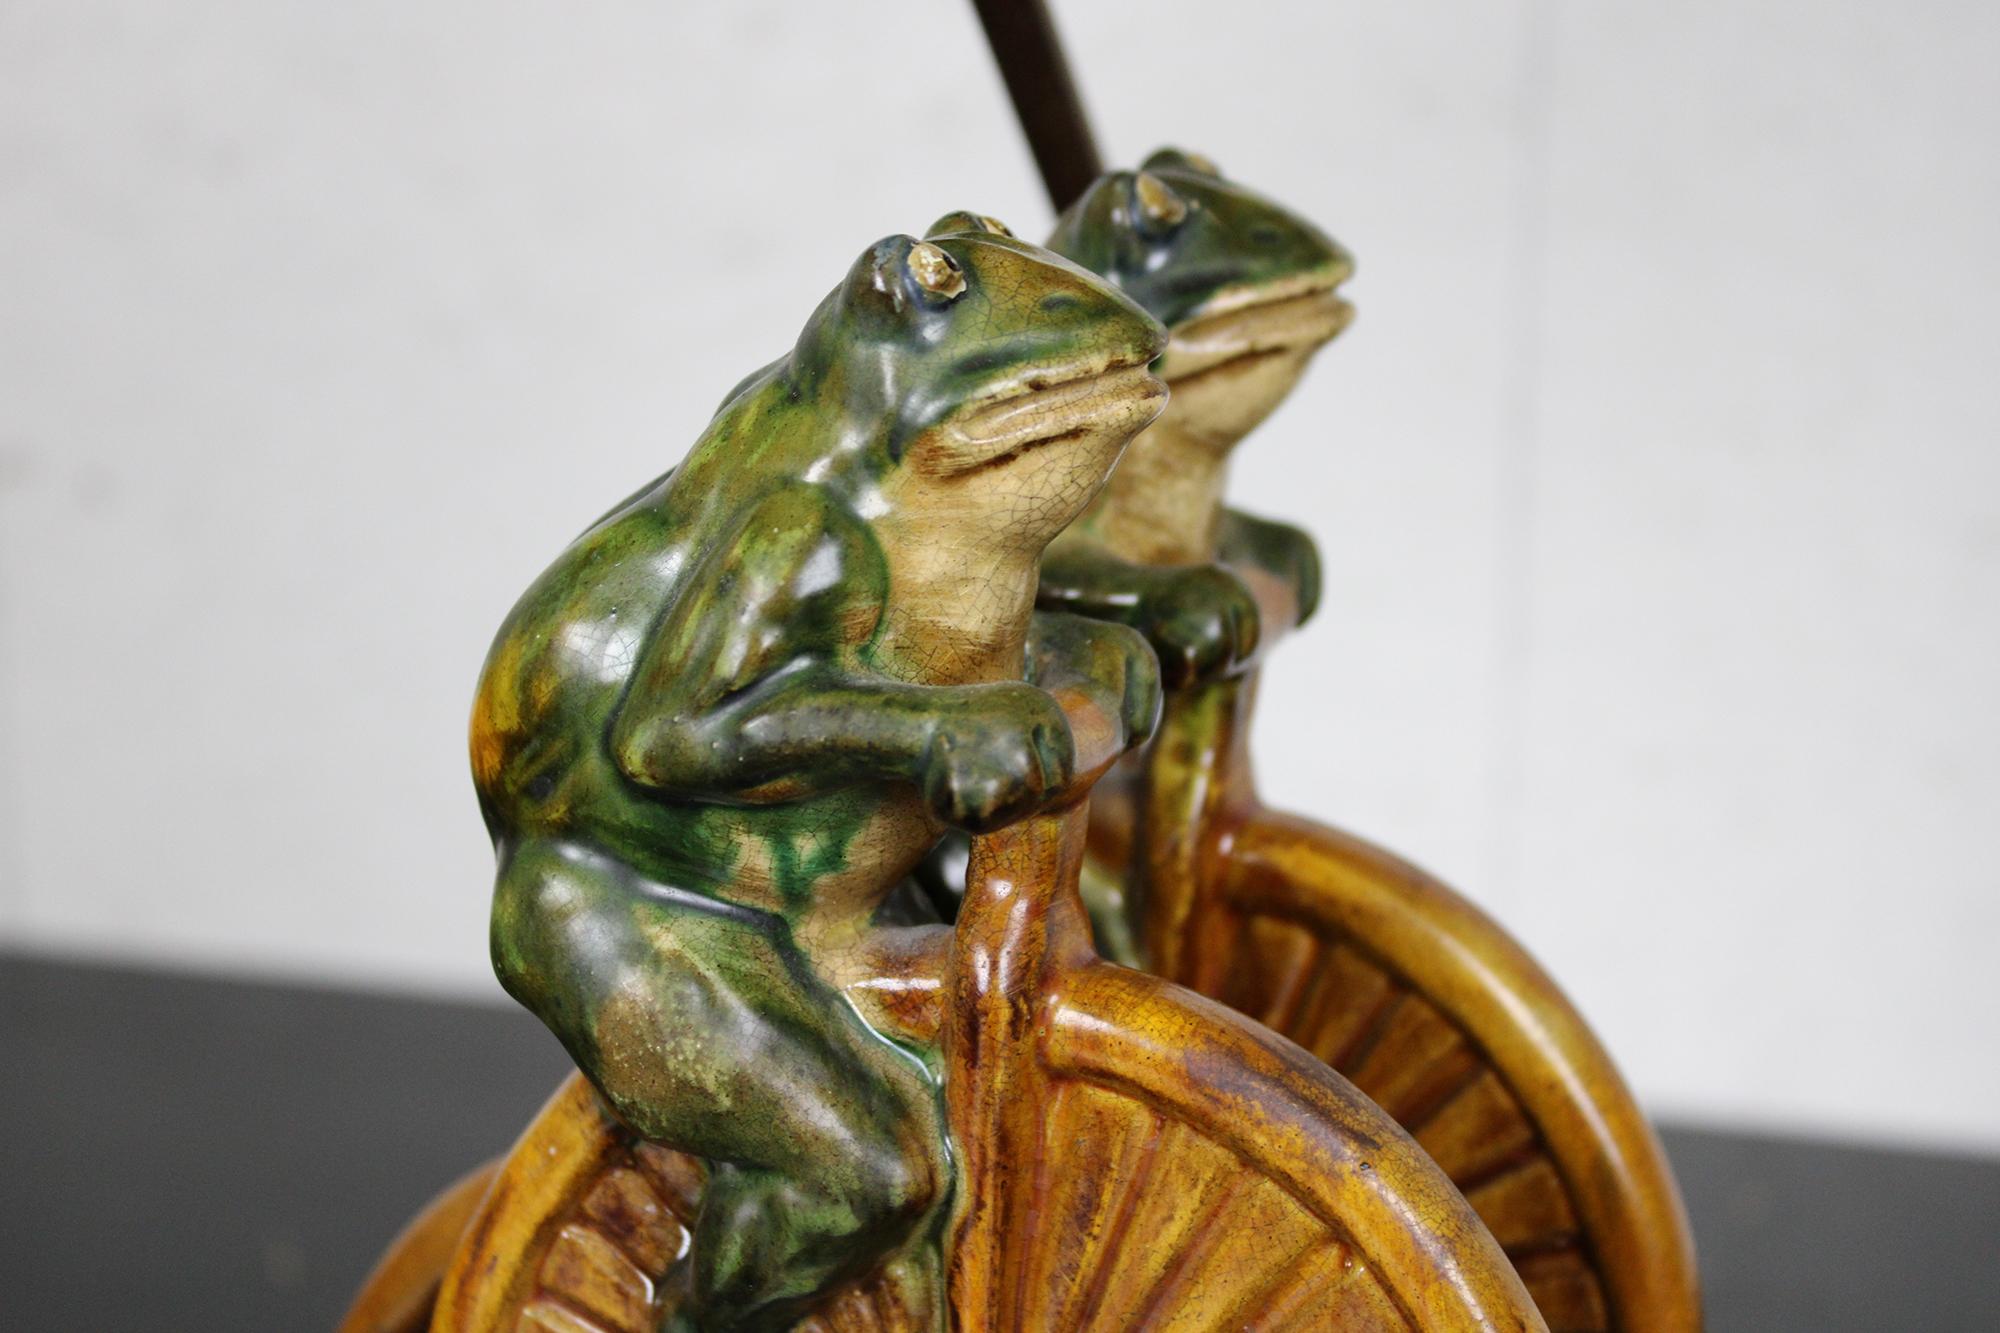 20th Century Frederick Cooper Ceramic Frogs on Penny Farthing Bicycle Parasol Shade Lamp